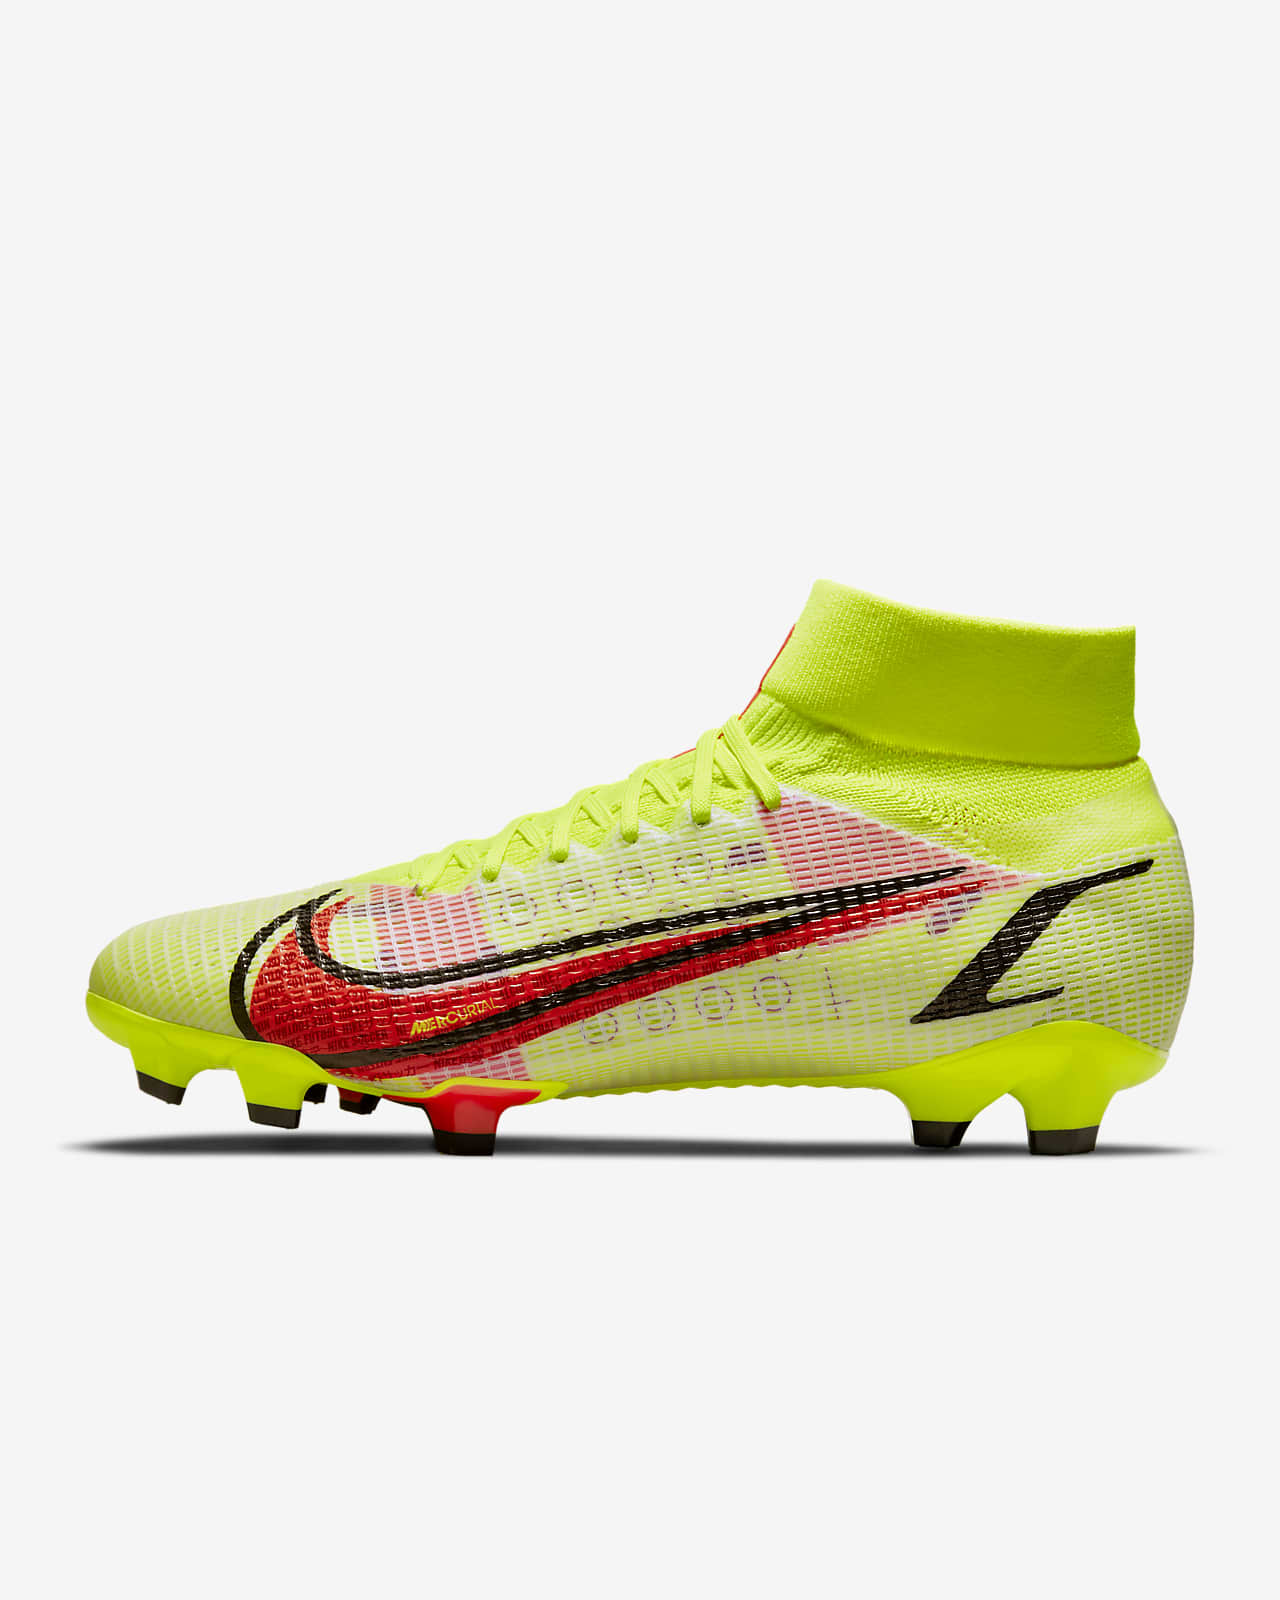 Nike Mercurial Superfly 8 Pro FG Soccer Cleats - Each